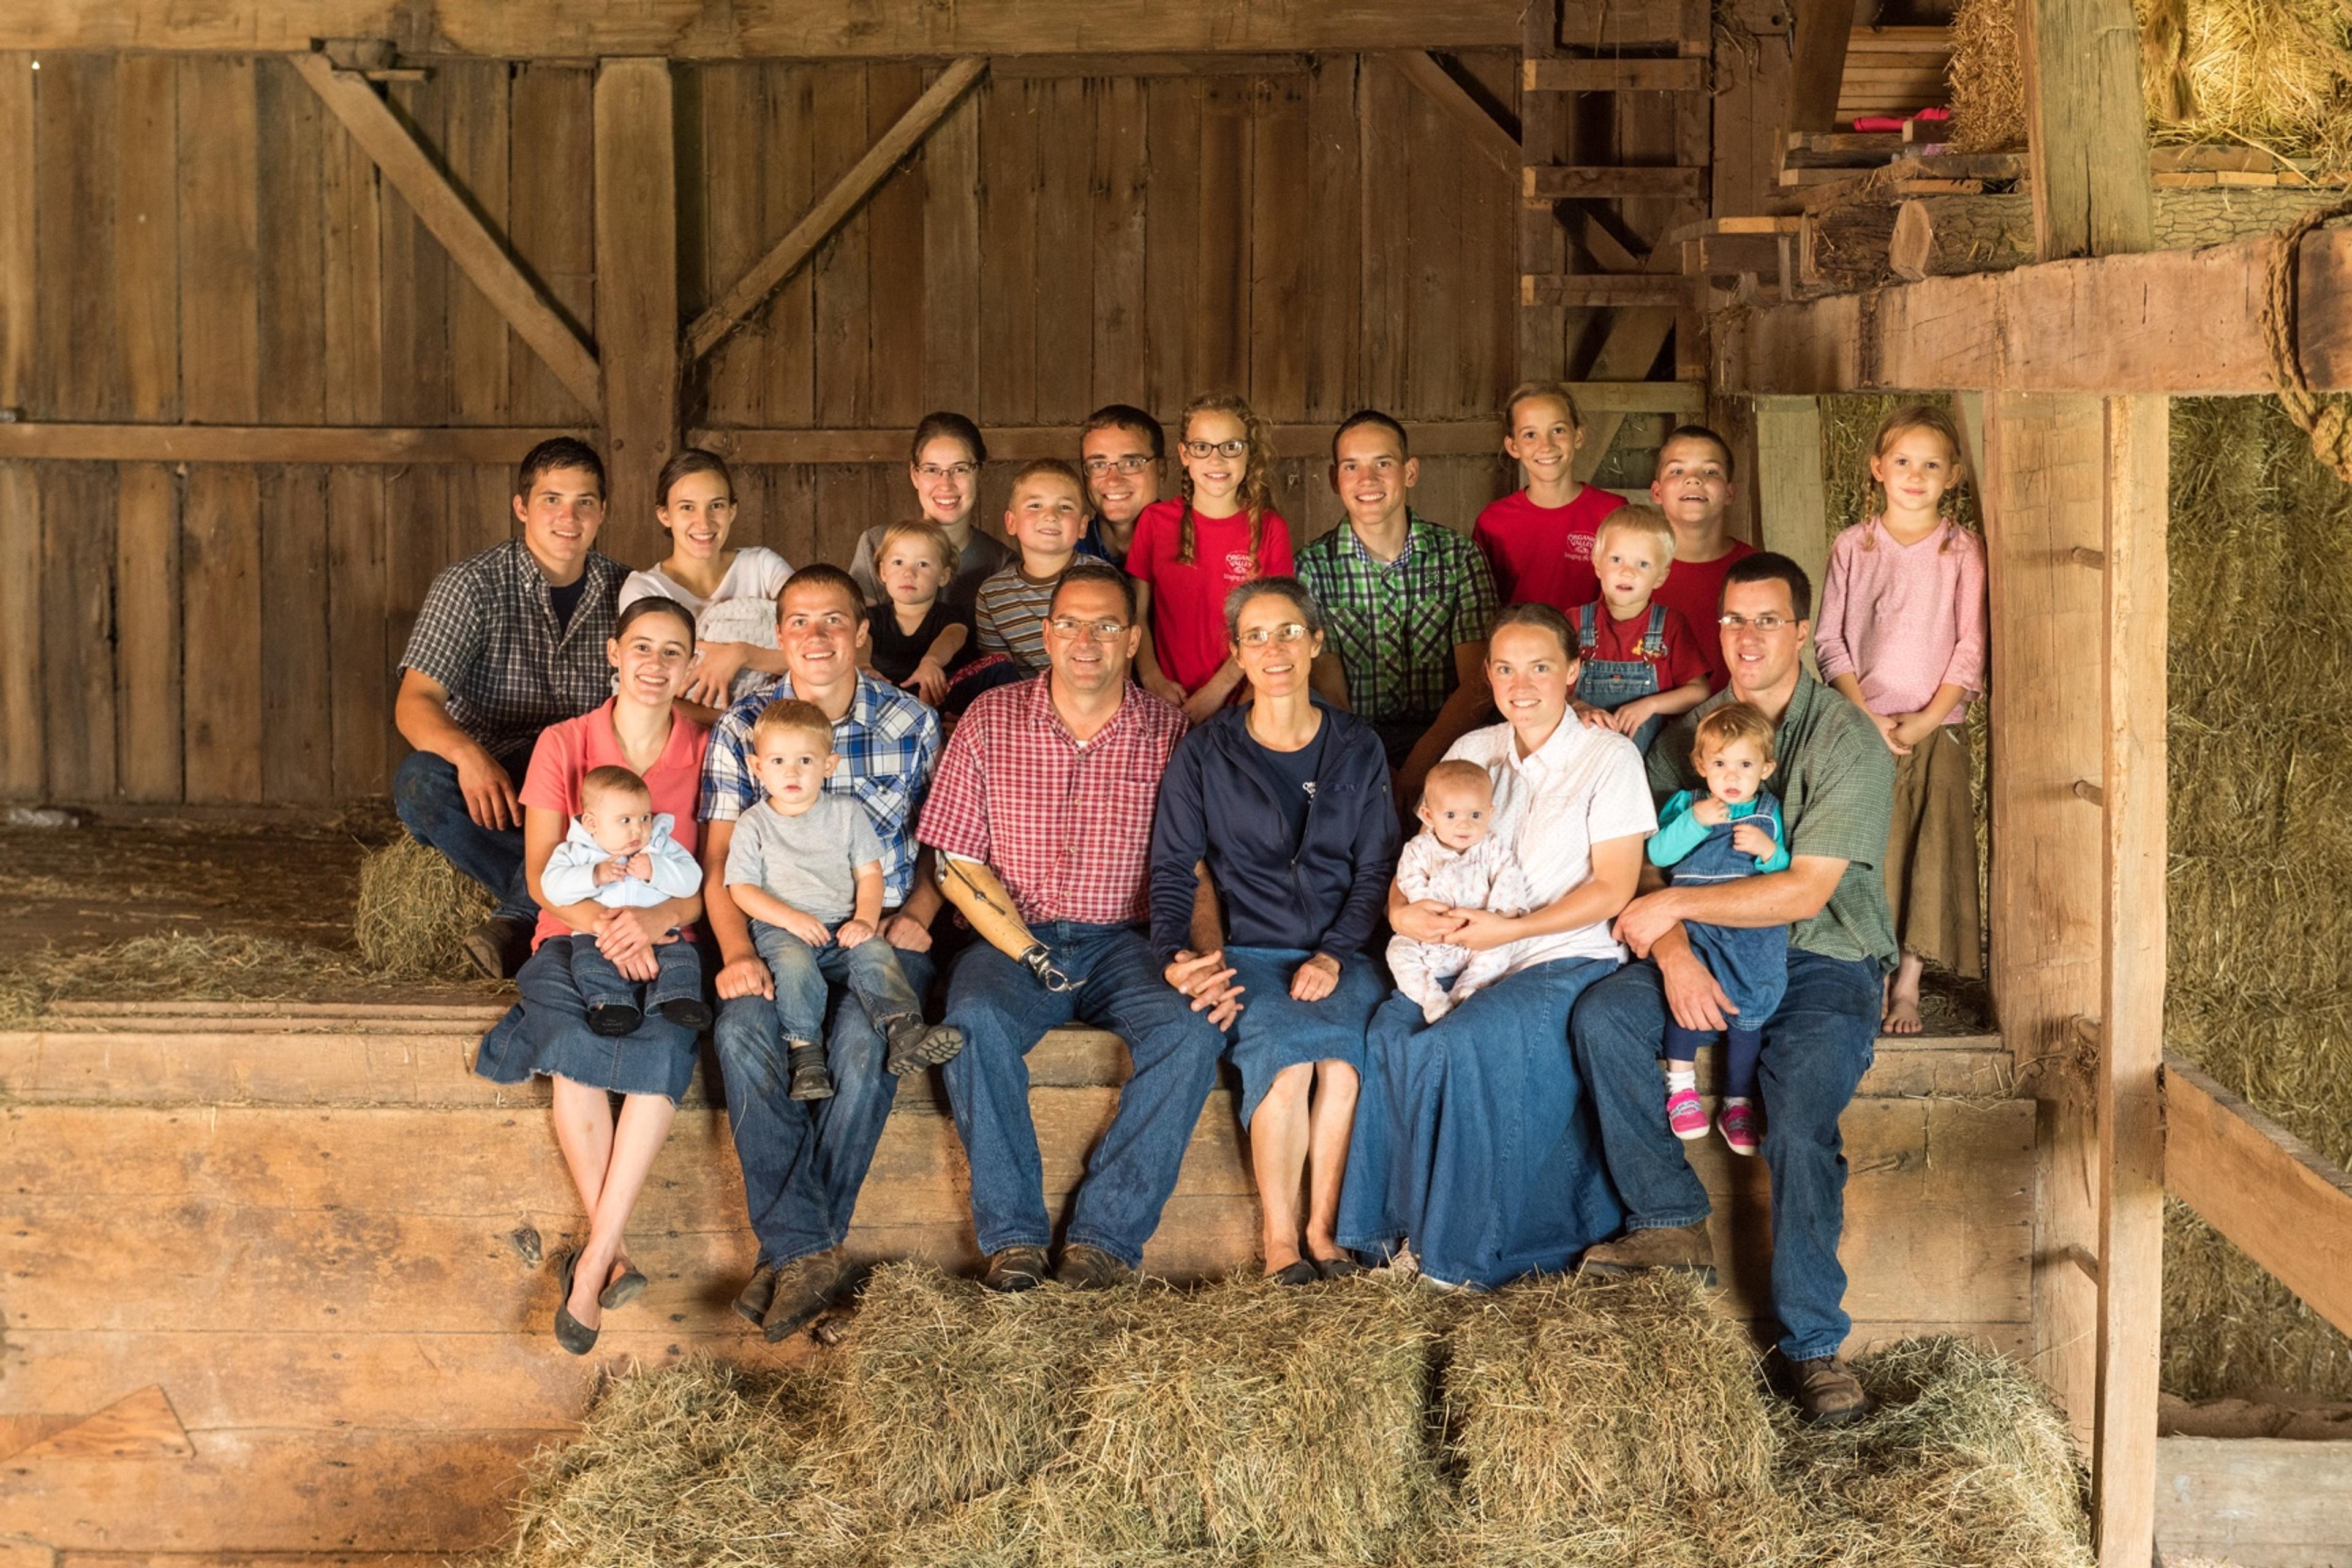 A portrait of a farm family made up of 23 adults, children and infants seated in their barn surrounded by hay bales.